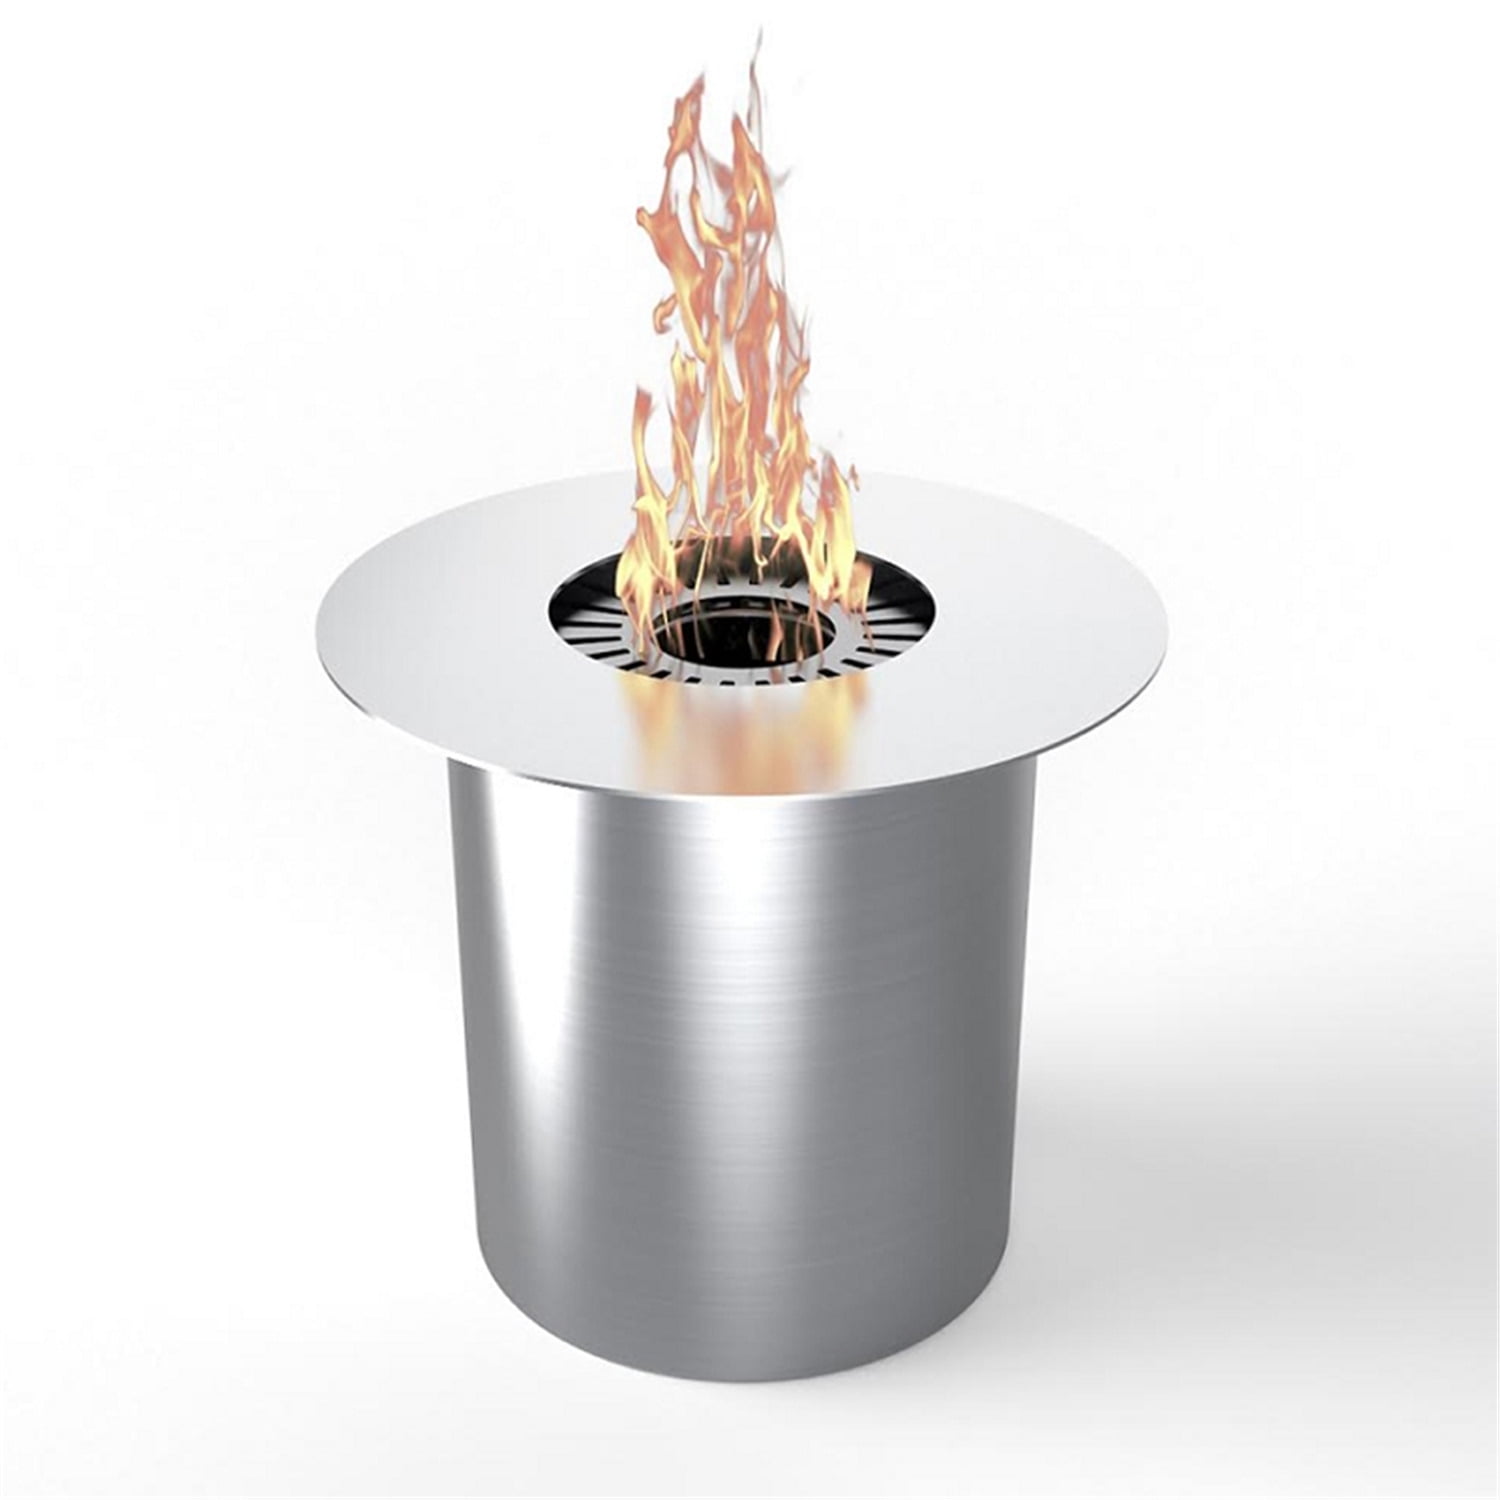 Regal Flame PRO Ethanol Circular Cup Burner Insert For Easy Conversion from Gel Fuel Cans, Gel Fireplace Fuel, Gel Fire Cans